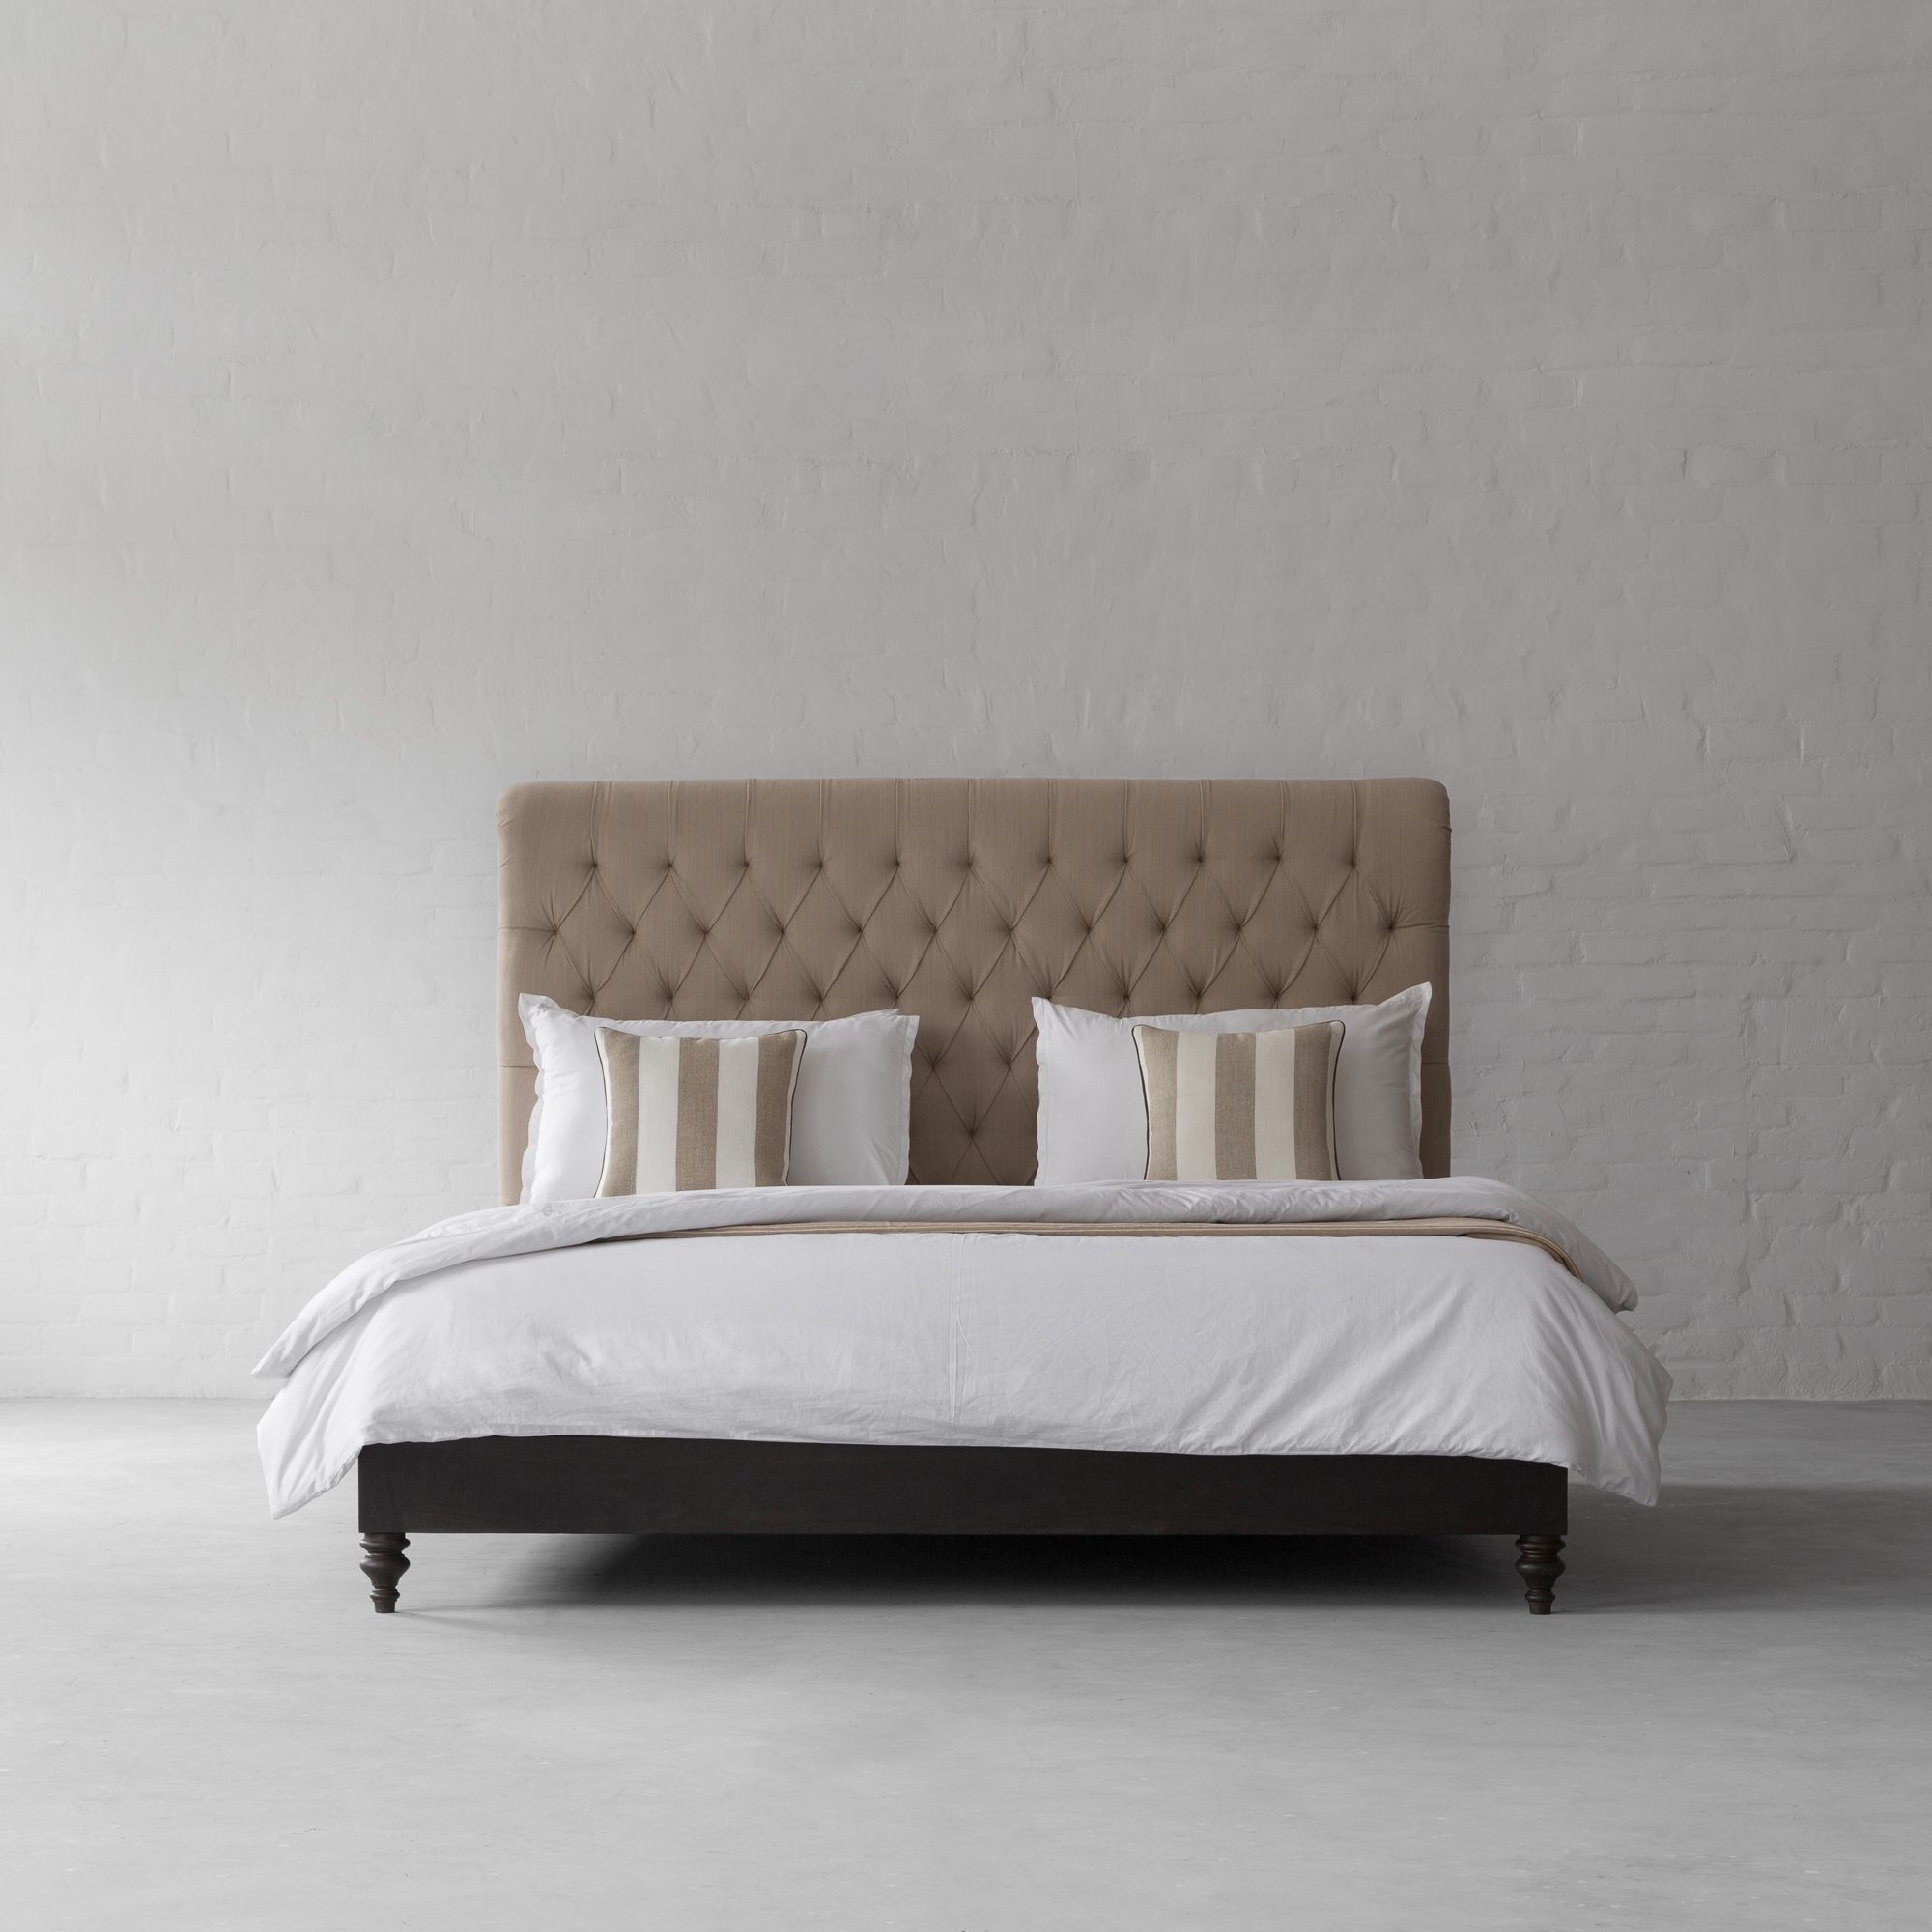 Chesterfield Bed Collection, Chesterfield Bed King